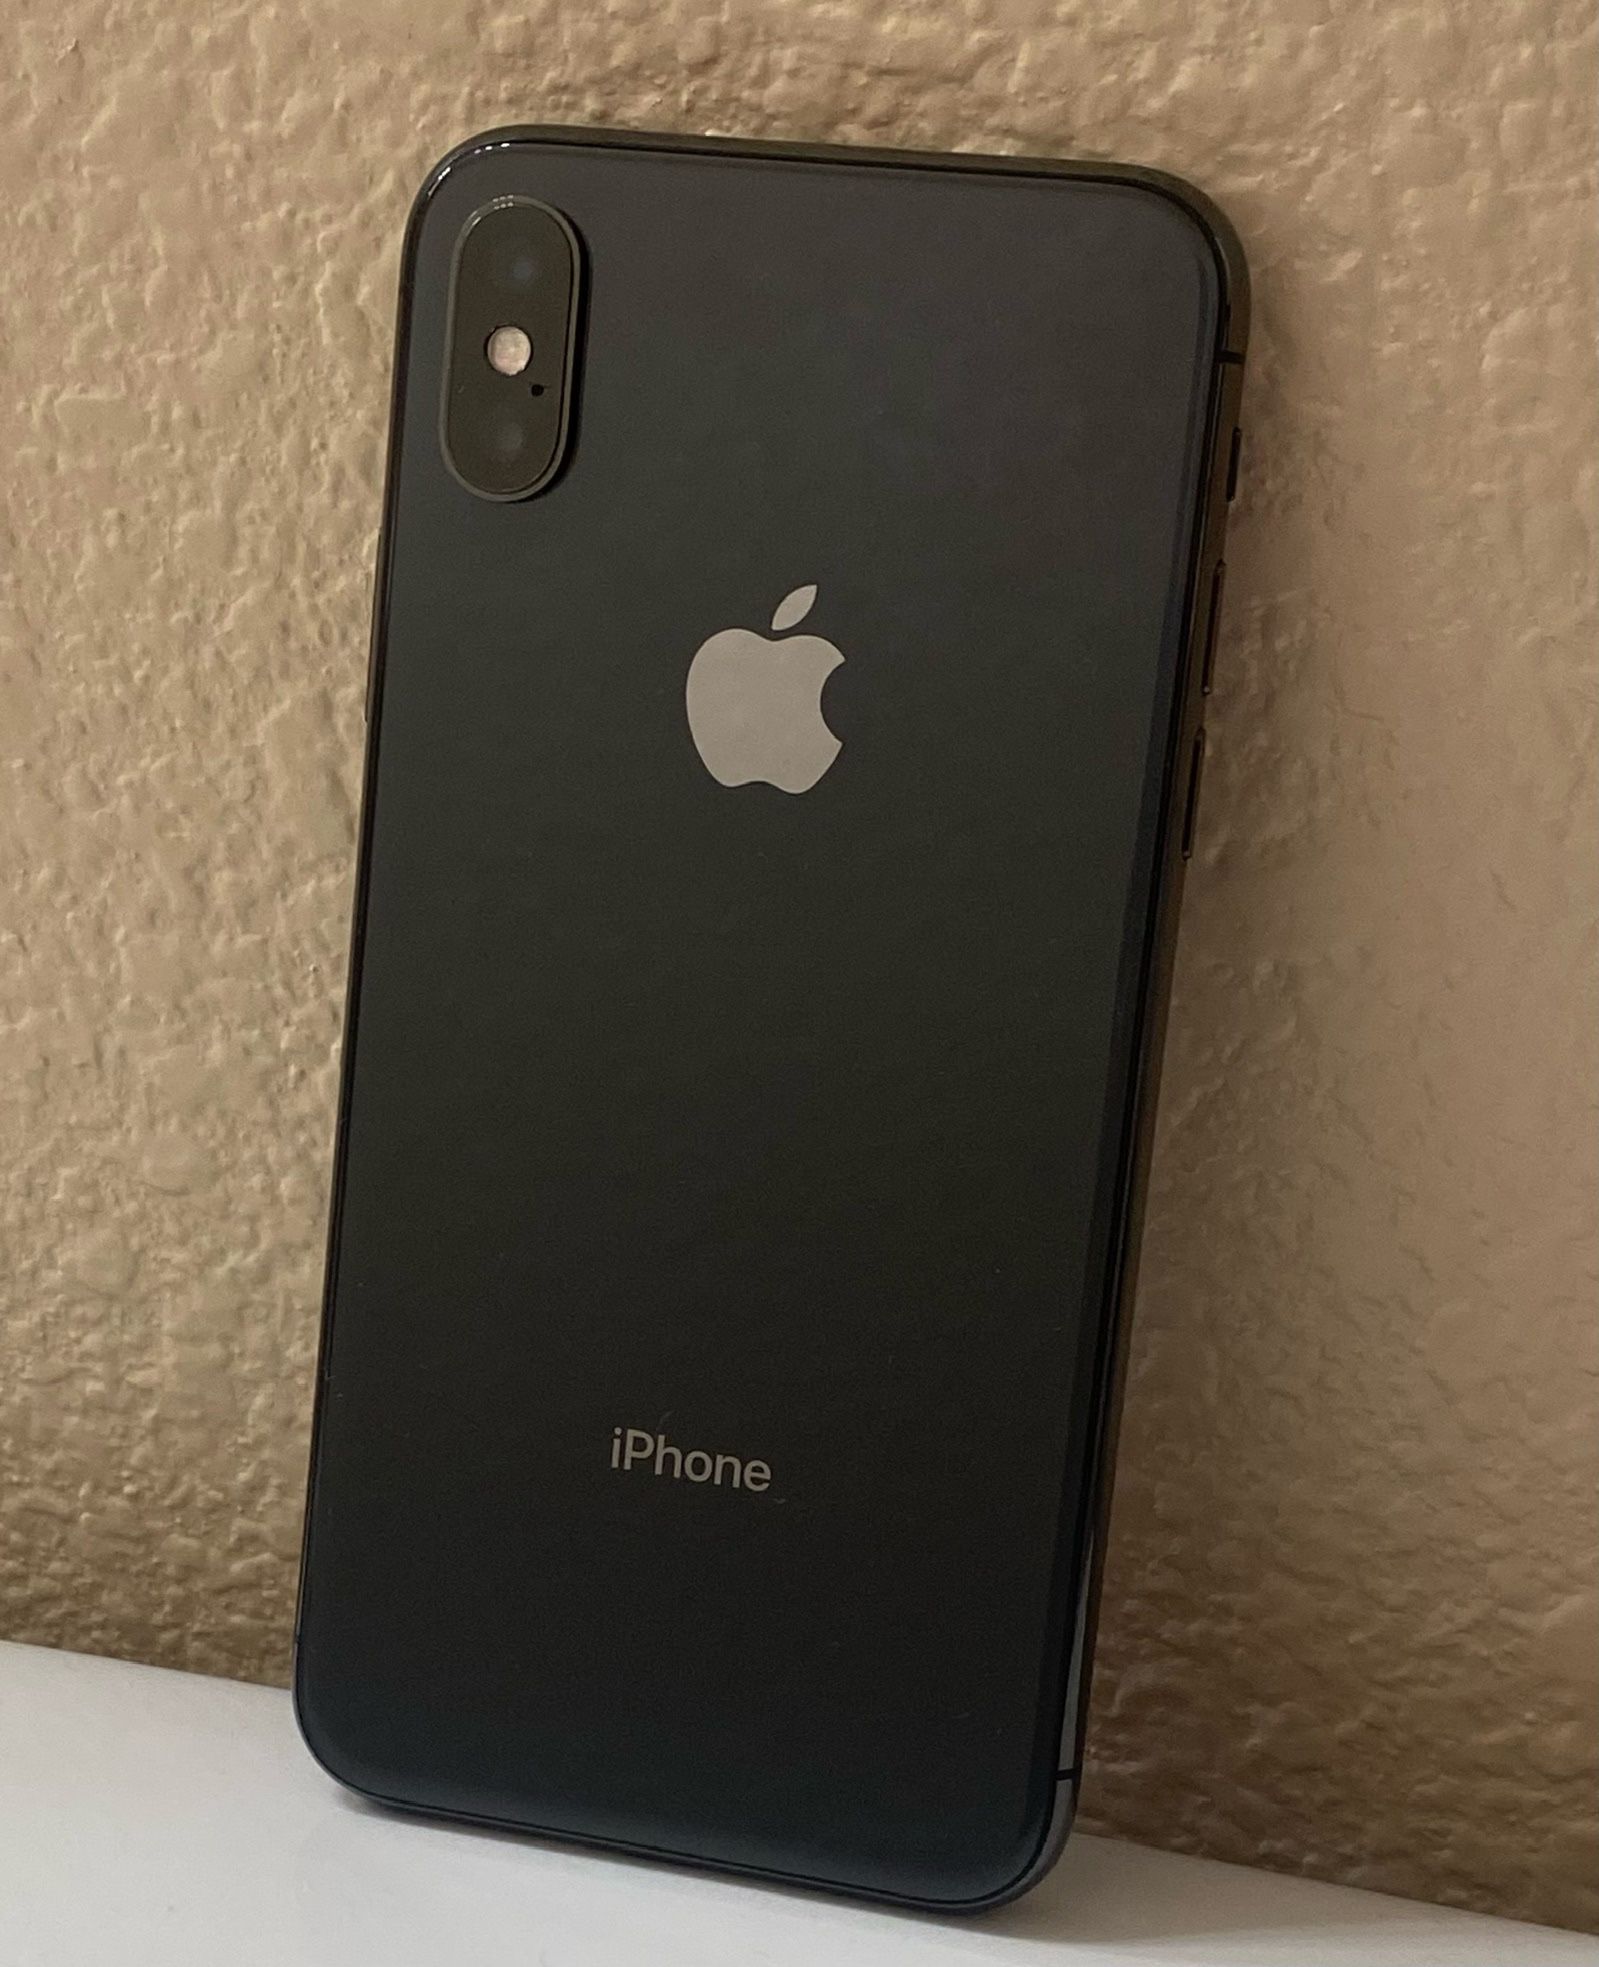 iPhone X - Great Condition 